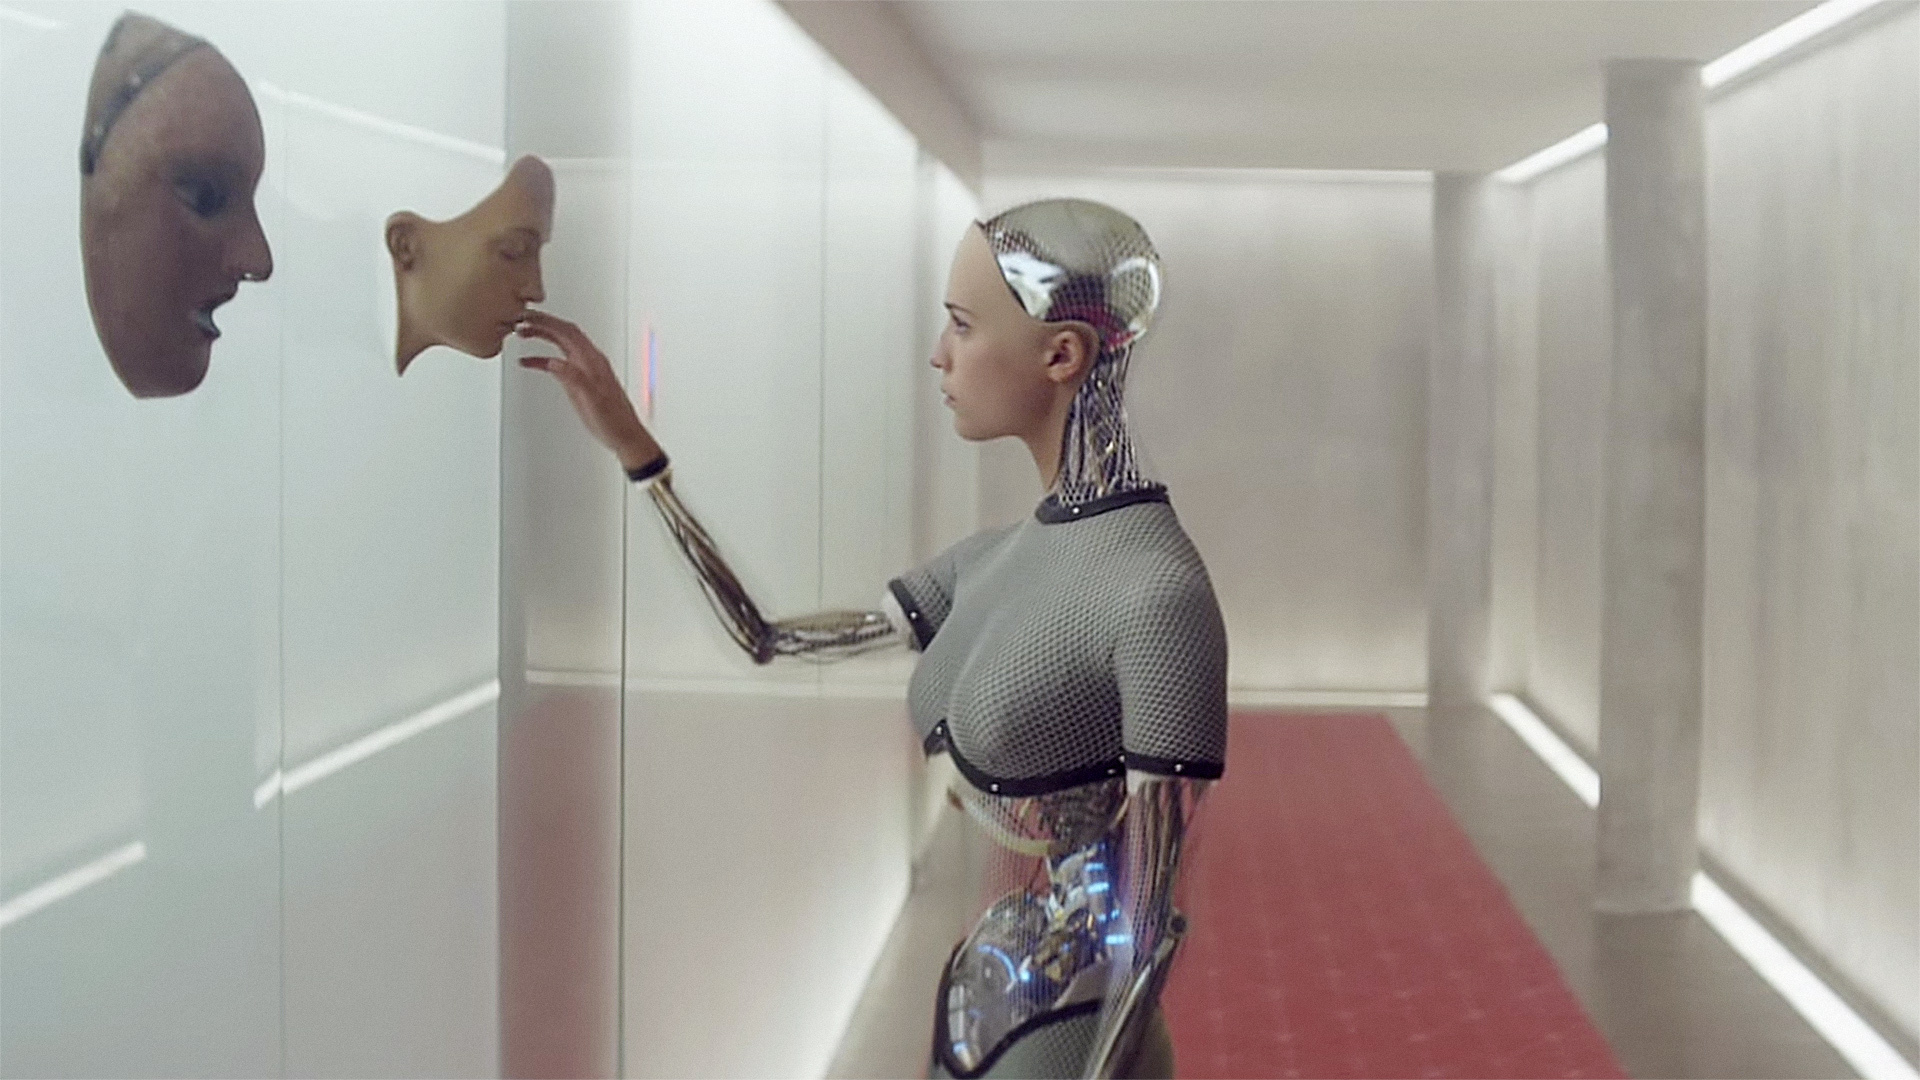 VFX Supervisor Andy Whitehurst presented the visual effects for Ex Machina, a film centered around a young programmer’s evaluation of a female android, with VFX provided by Double Negative, Milk VFX and Utopia.